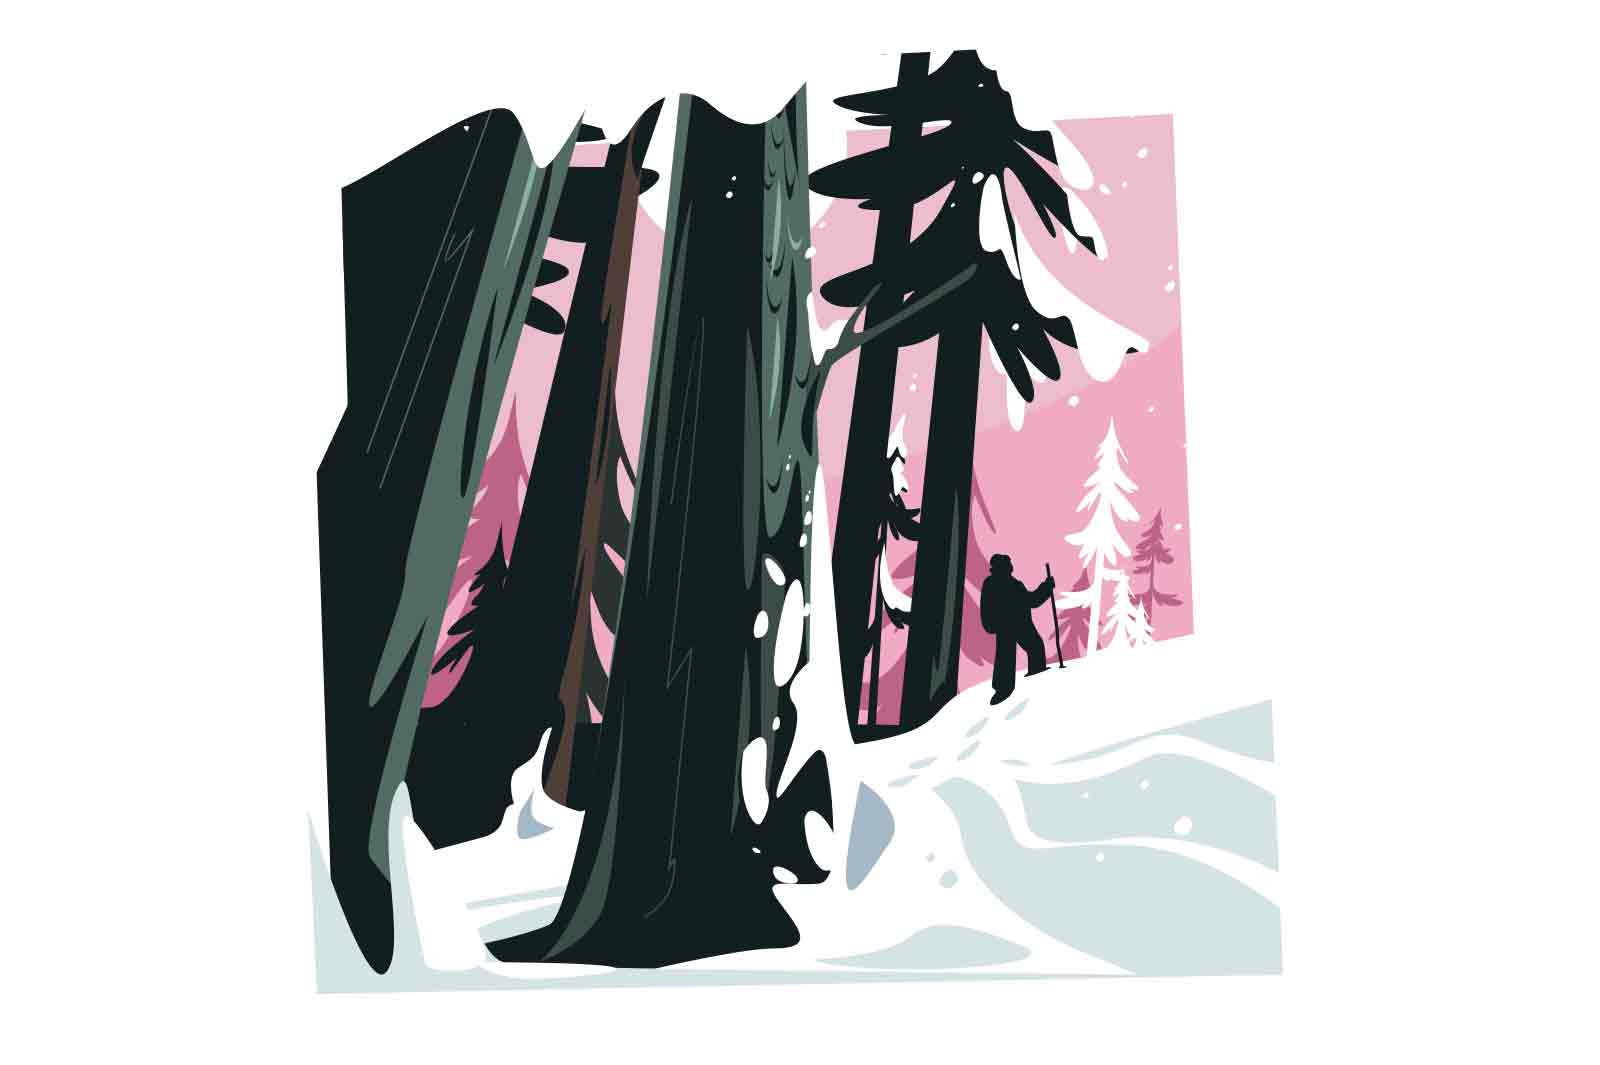 Winter forest with tall trees and snow-covered ground, vector illustration. A lone figure moves through the forest.